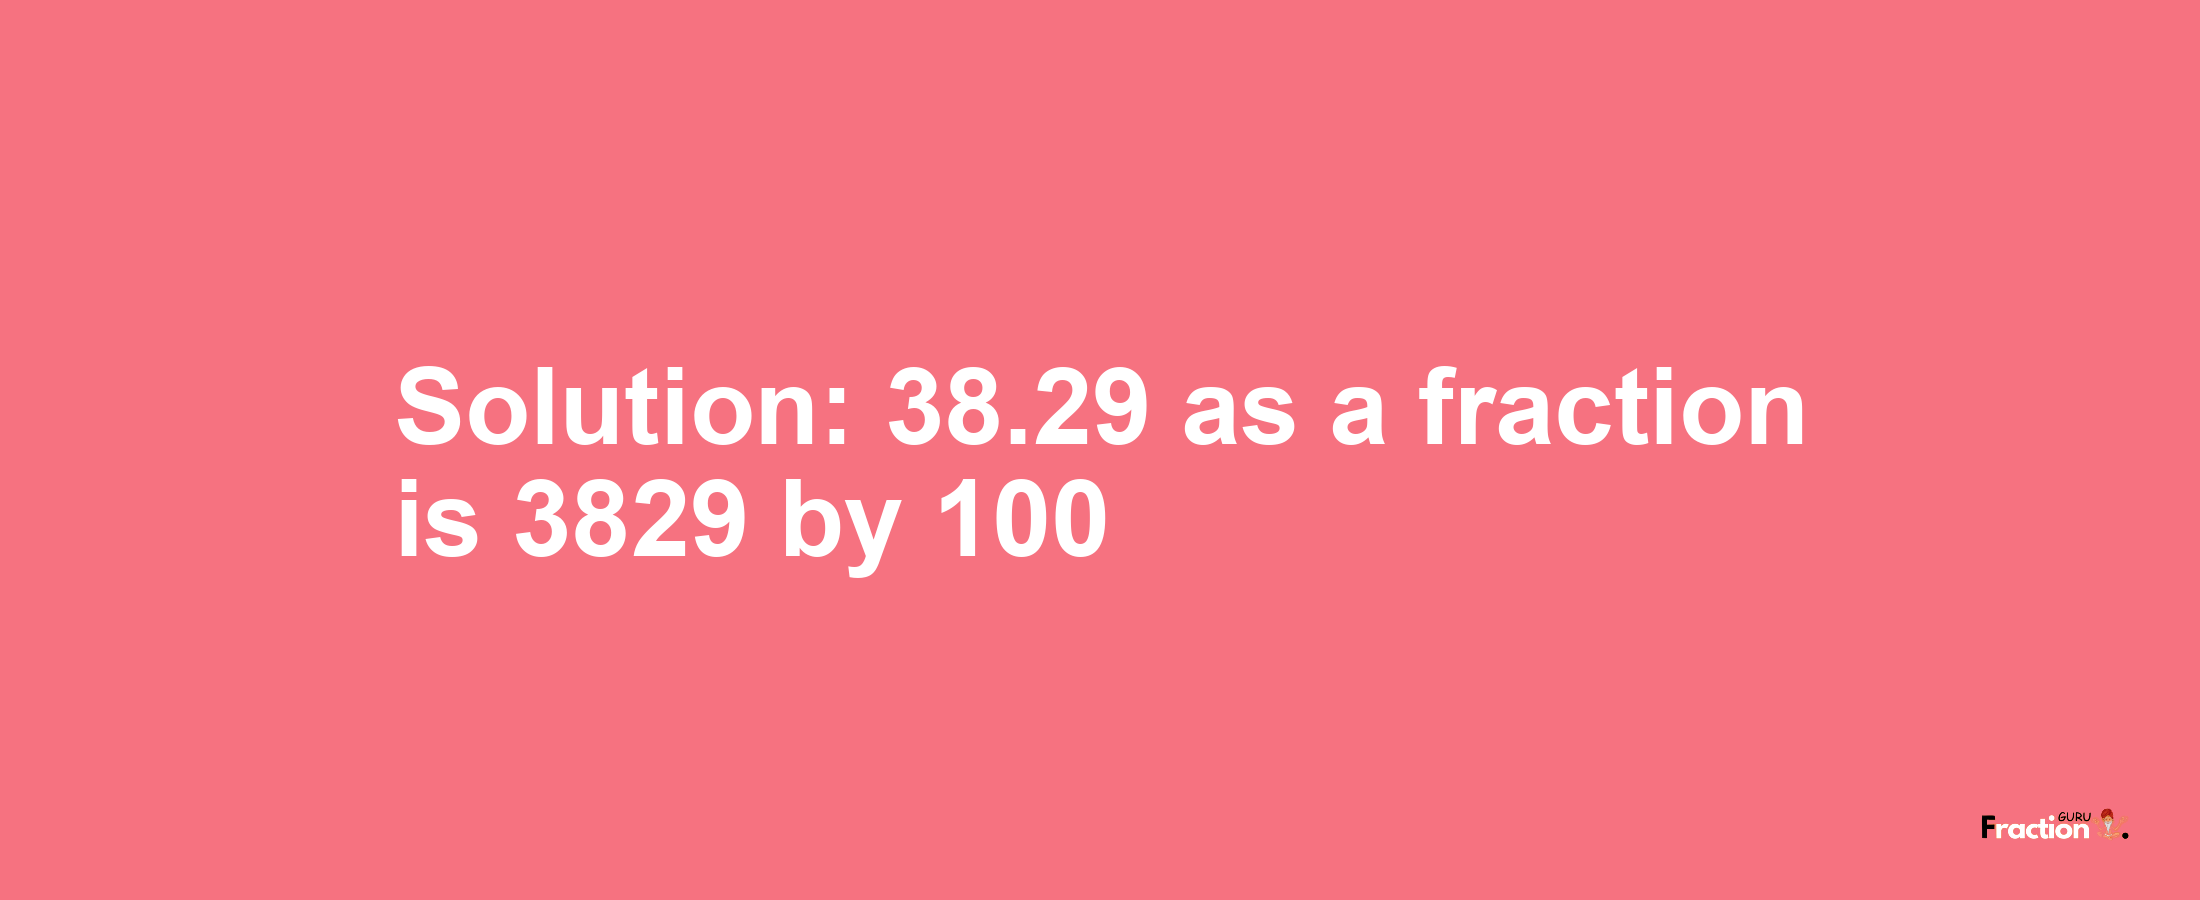 Solution:38.29 as a fraction is 3829/100